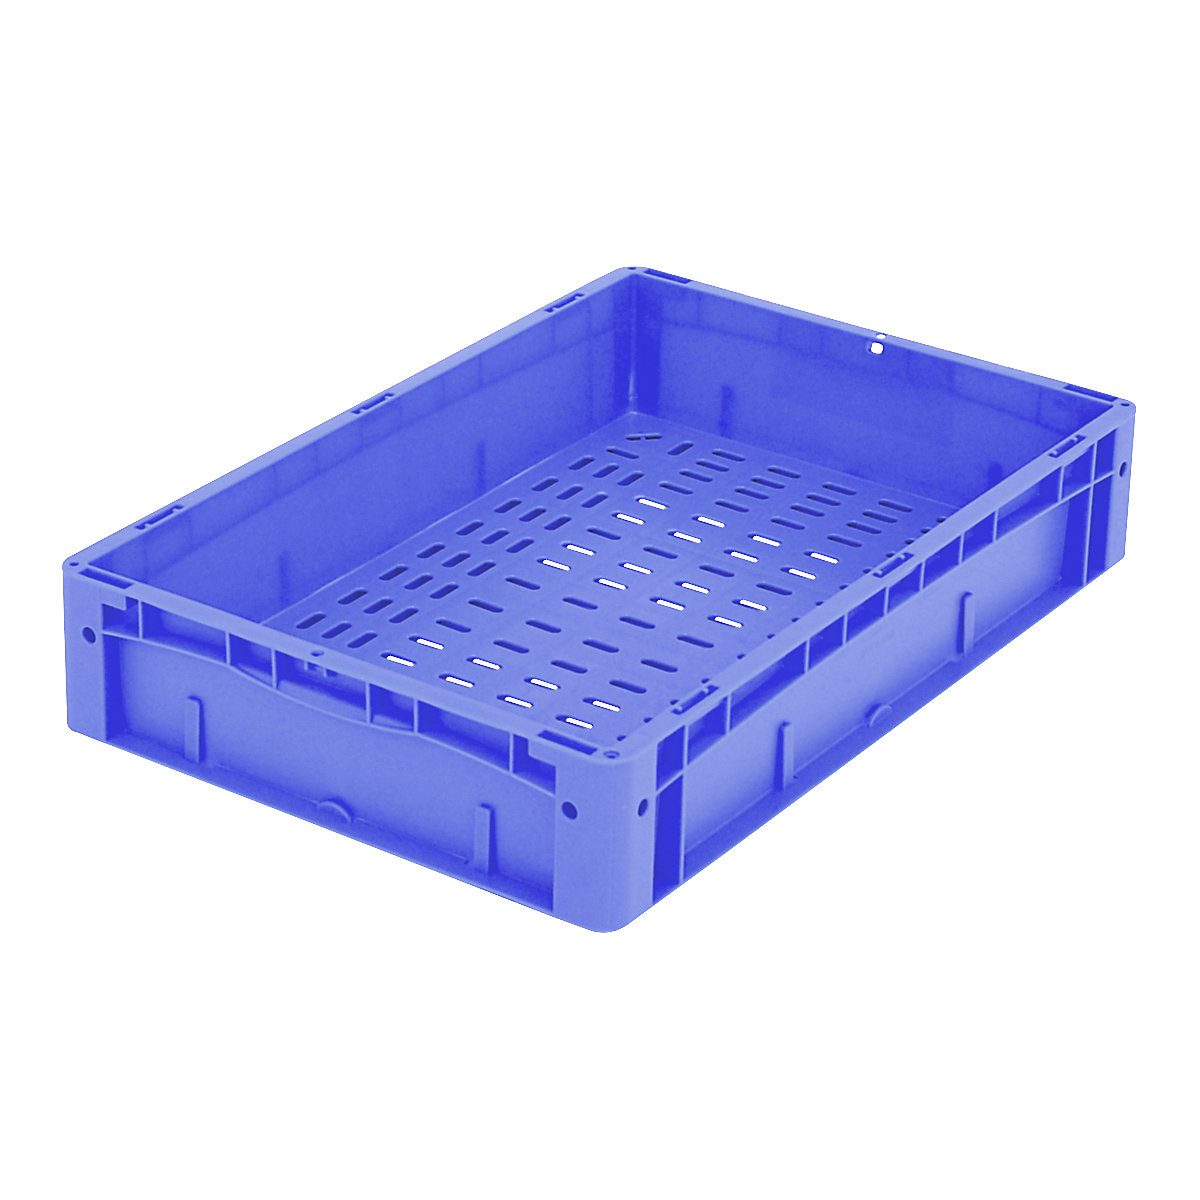 XL Euro stacking container – BITO, solid walls, perforated base, LxWxH 600 x 400 x 120 mm-1